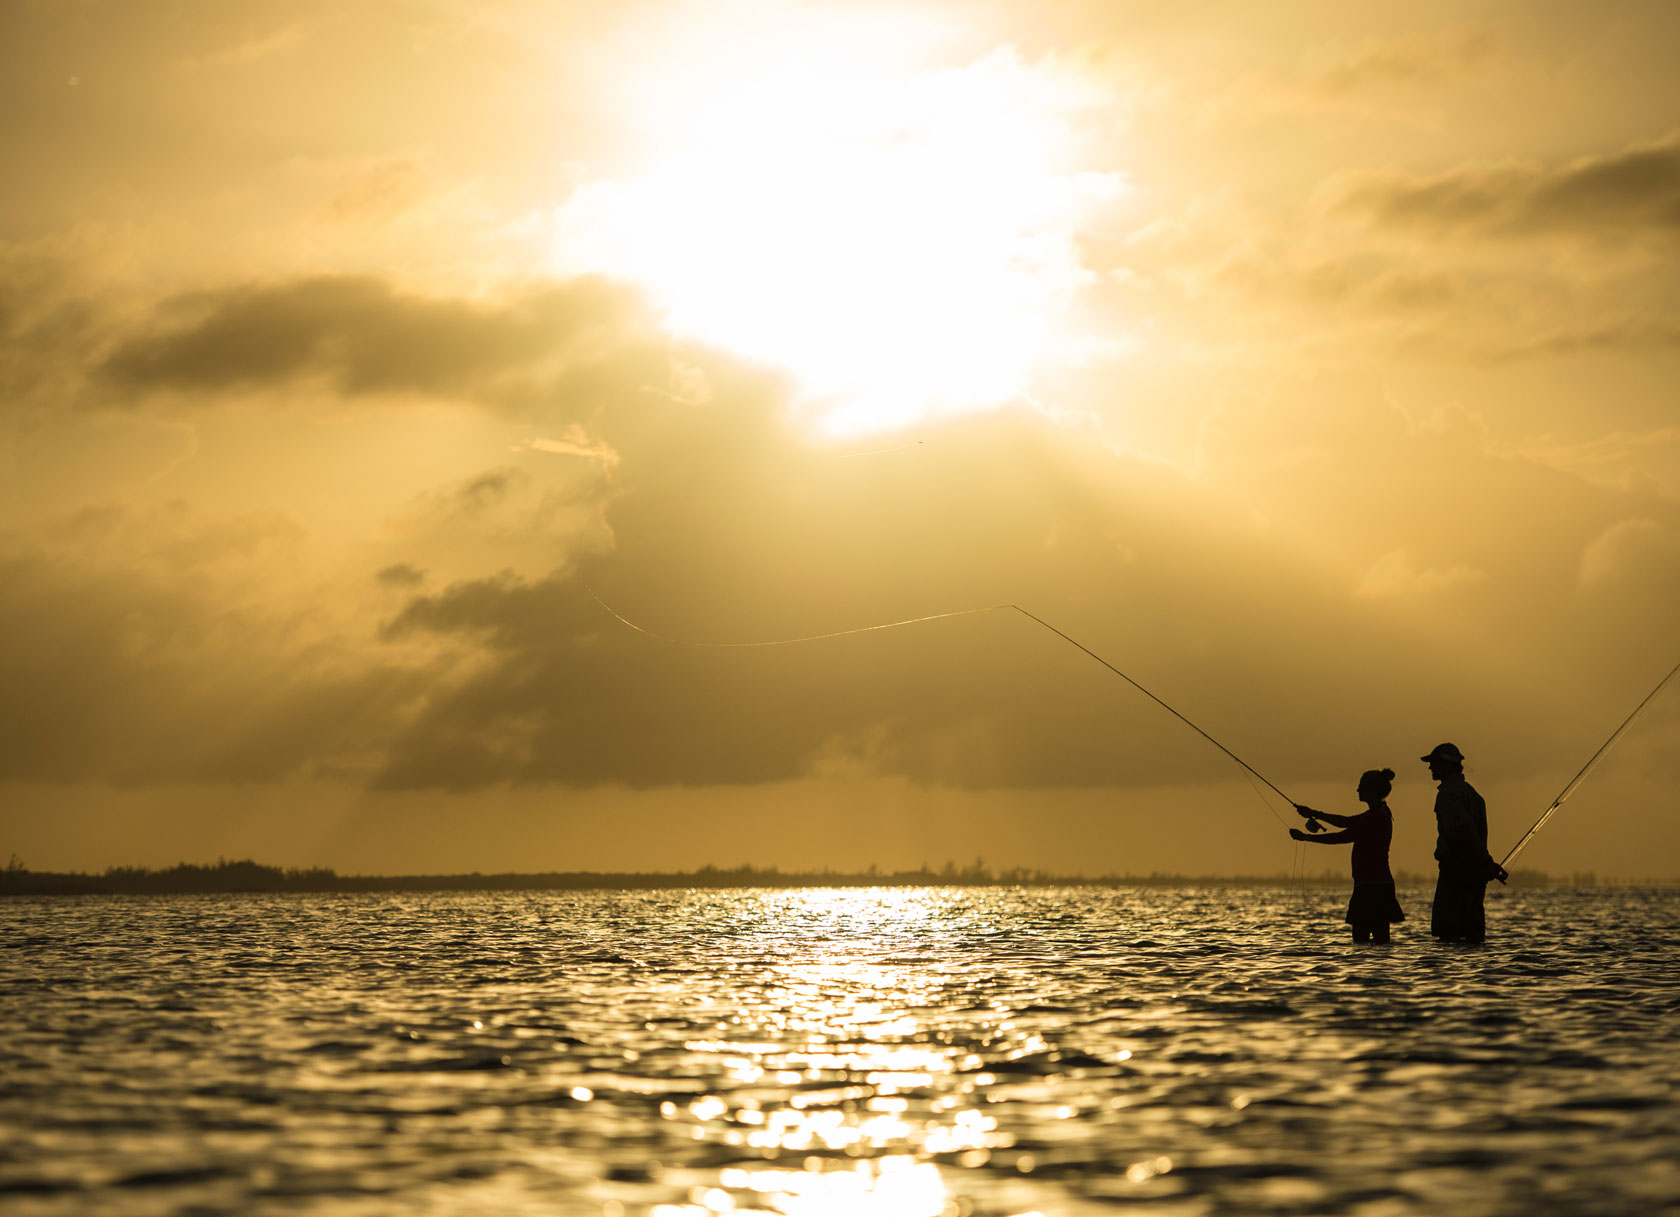 The Do’s and Don'ts of Preparing for Your Next Big Fishing Trip